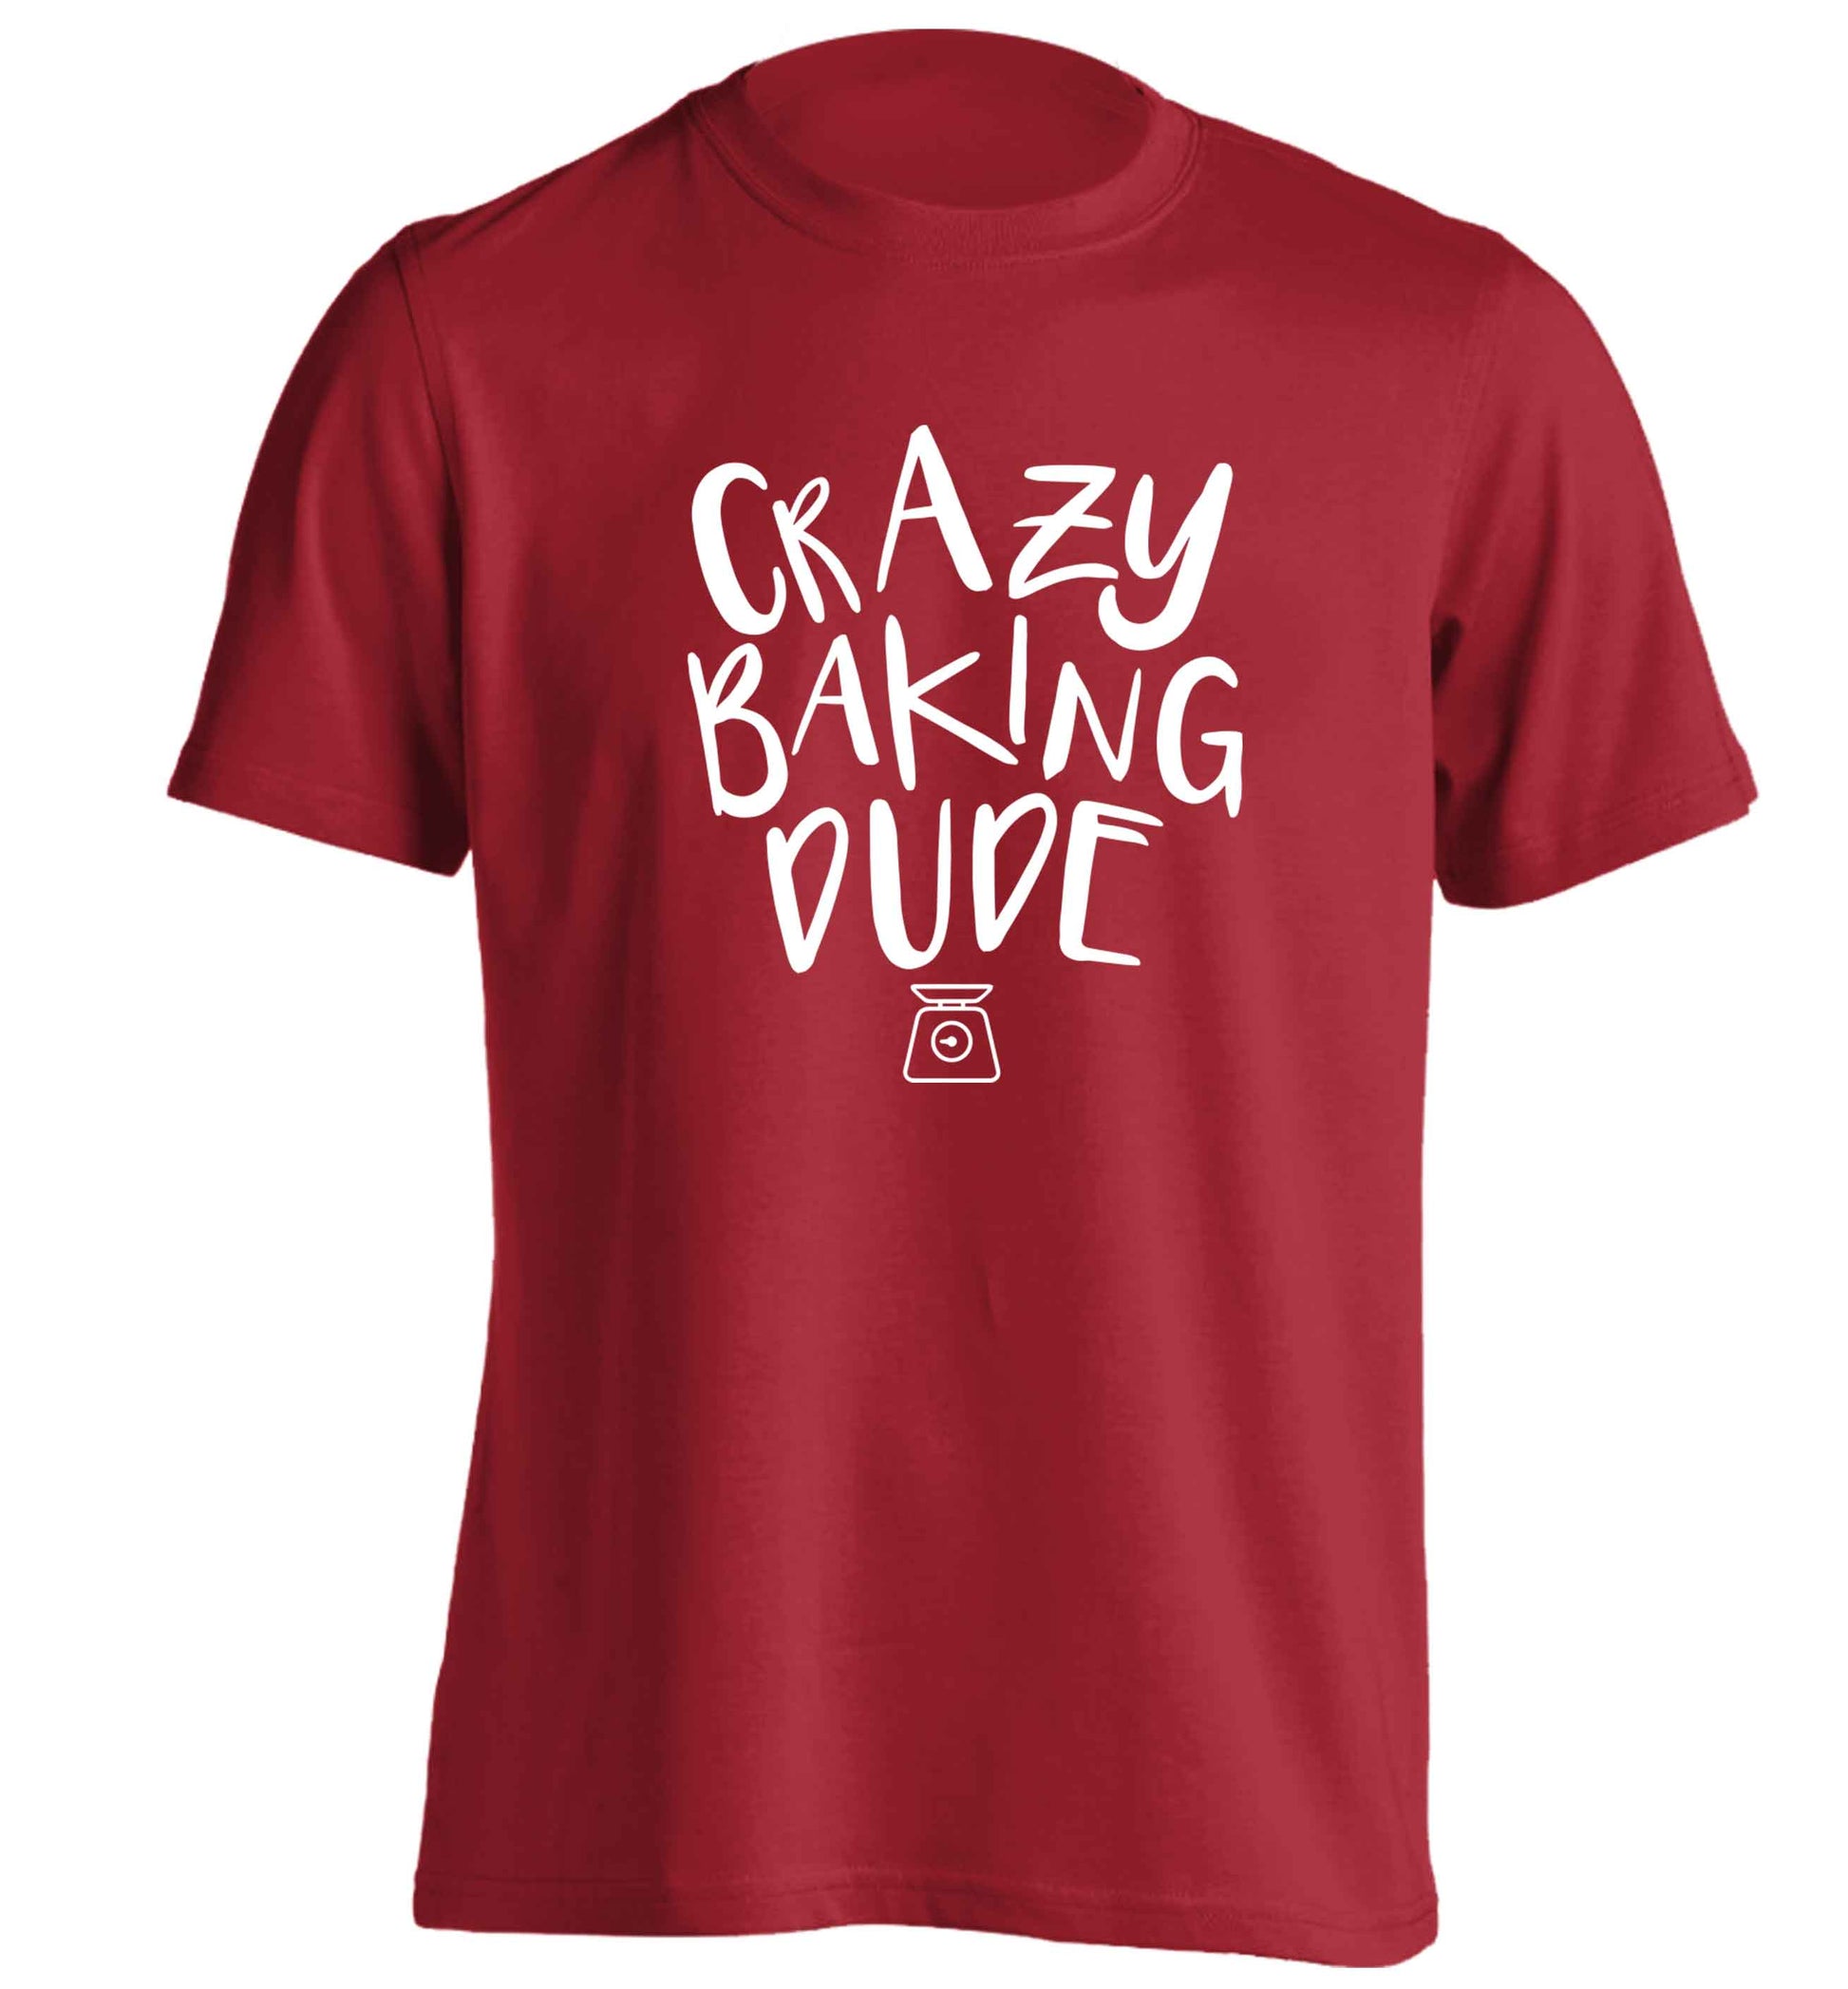 Crazy baking dude adults unisex red Tshirt 2XL